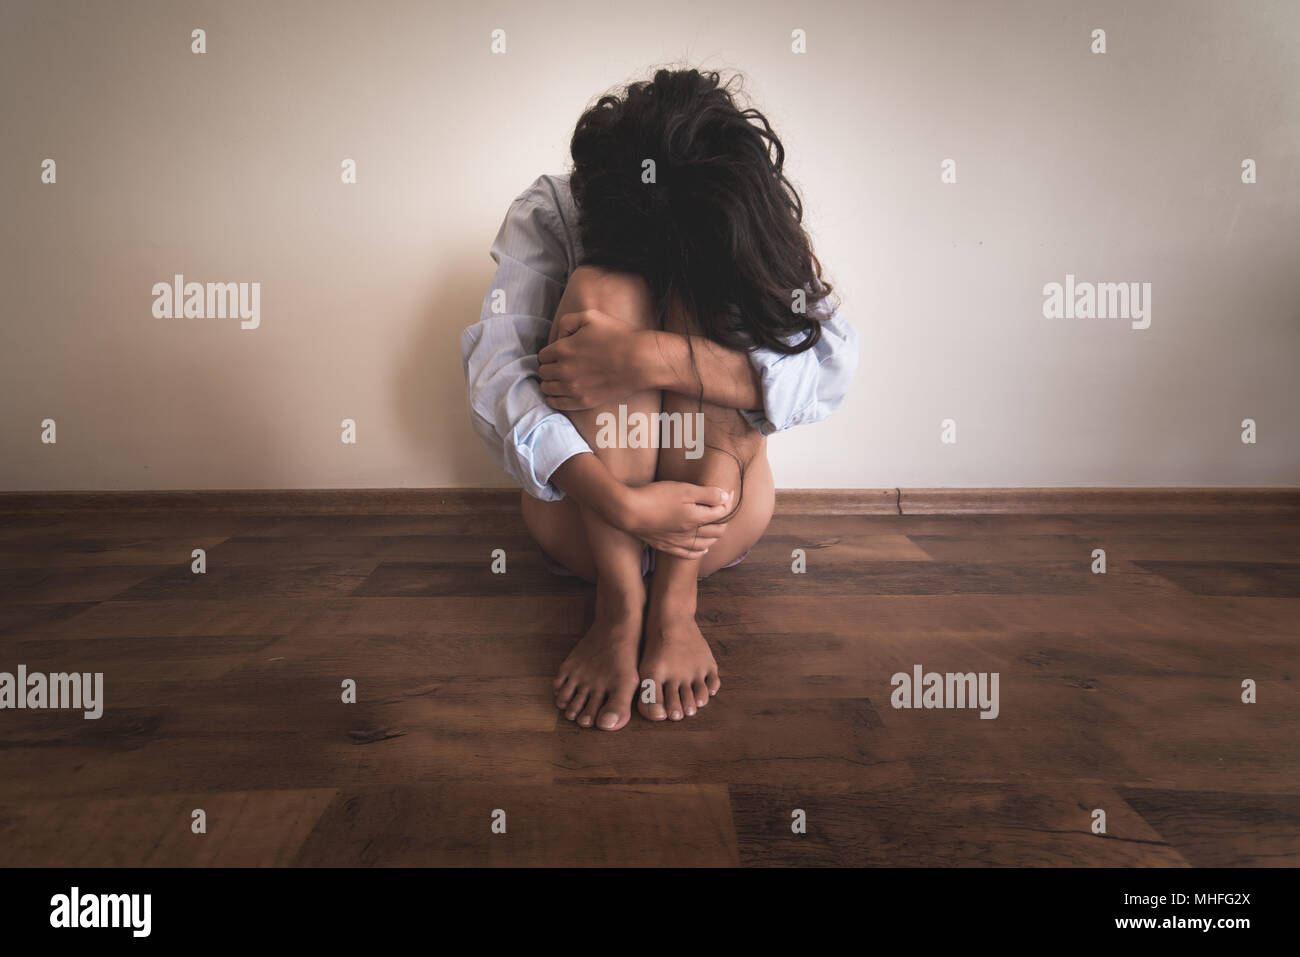 one sad woman sitting on the floor near a wall and holding her legs in her hands Stock Photo